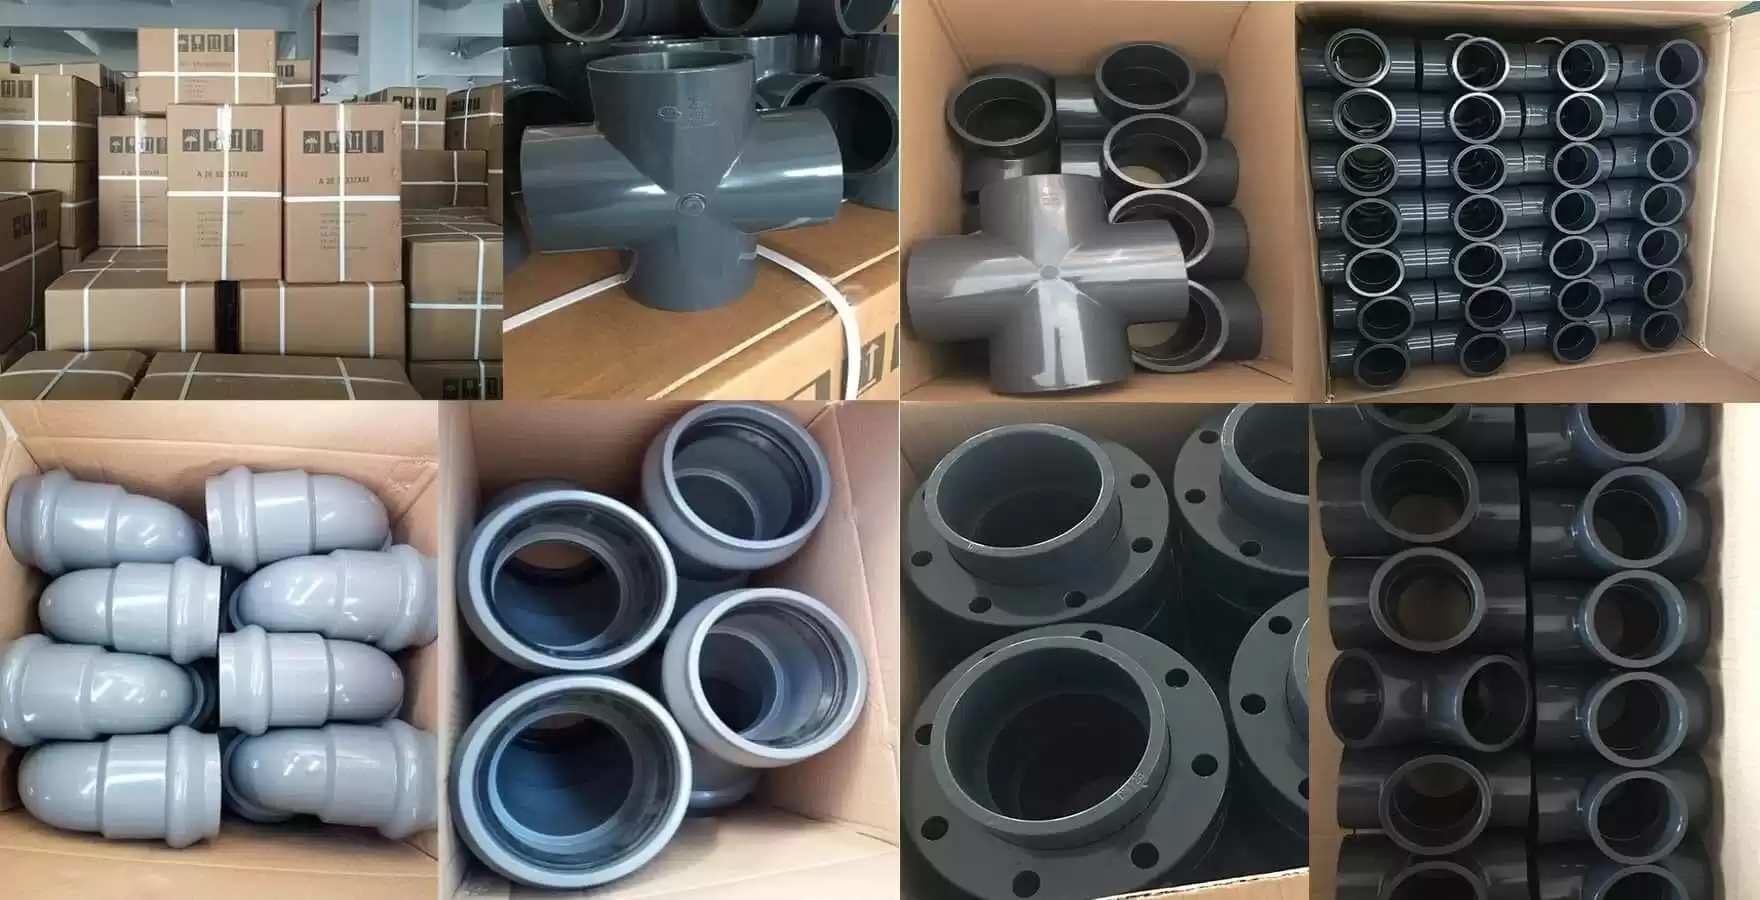 PVC UPVC CPVC Elbow Tee HDPE Chemical Industry Plumbing Pipe Fittings